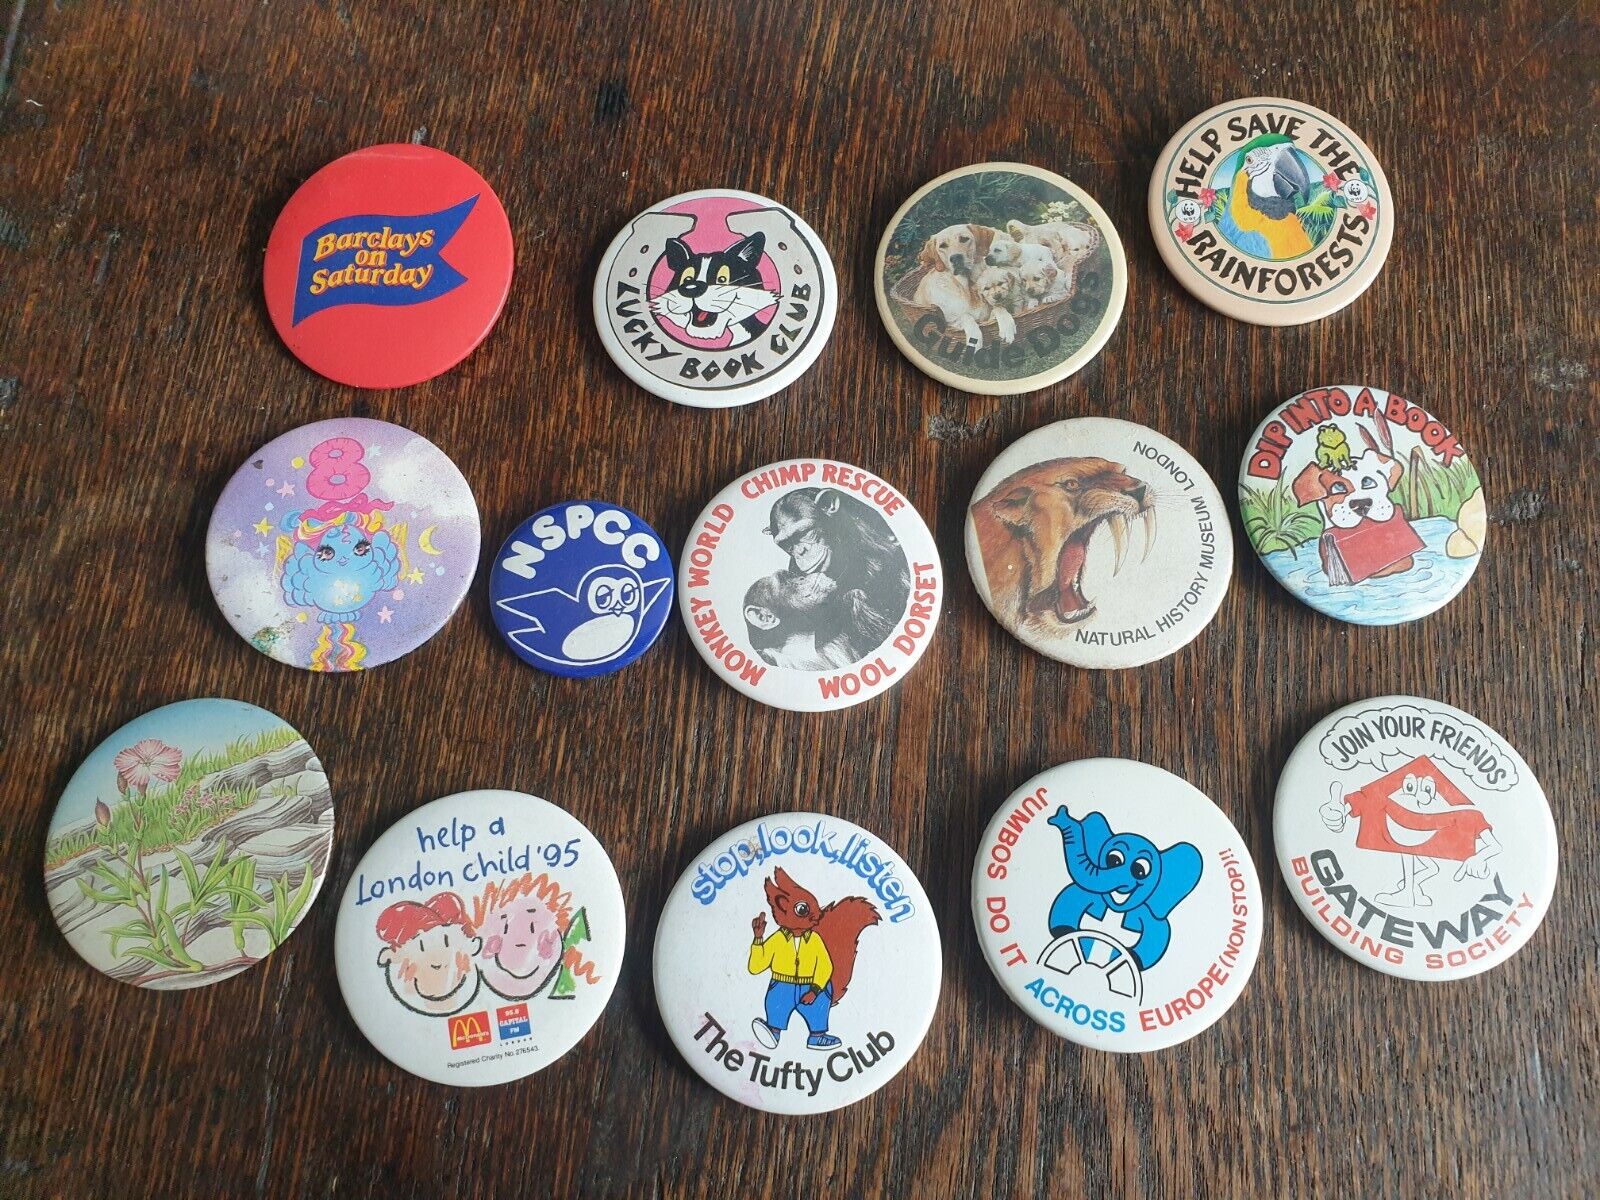 Bundle Of Vintage Pins / Badges / Buttons - 80s/90s - From A Large Collection